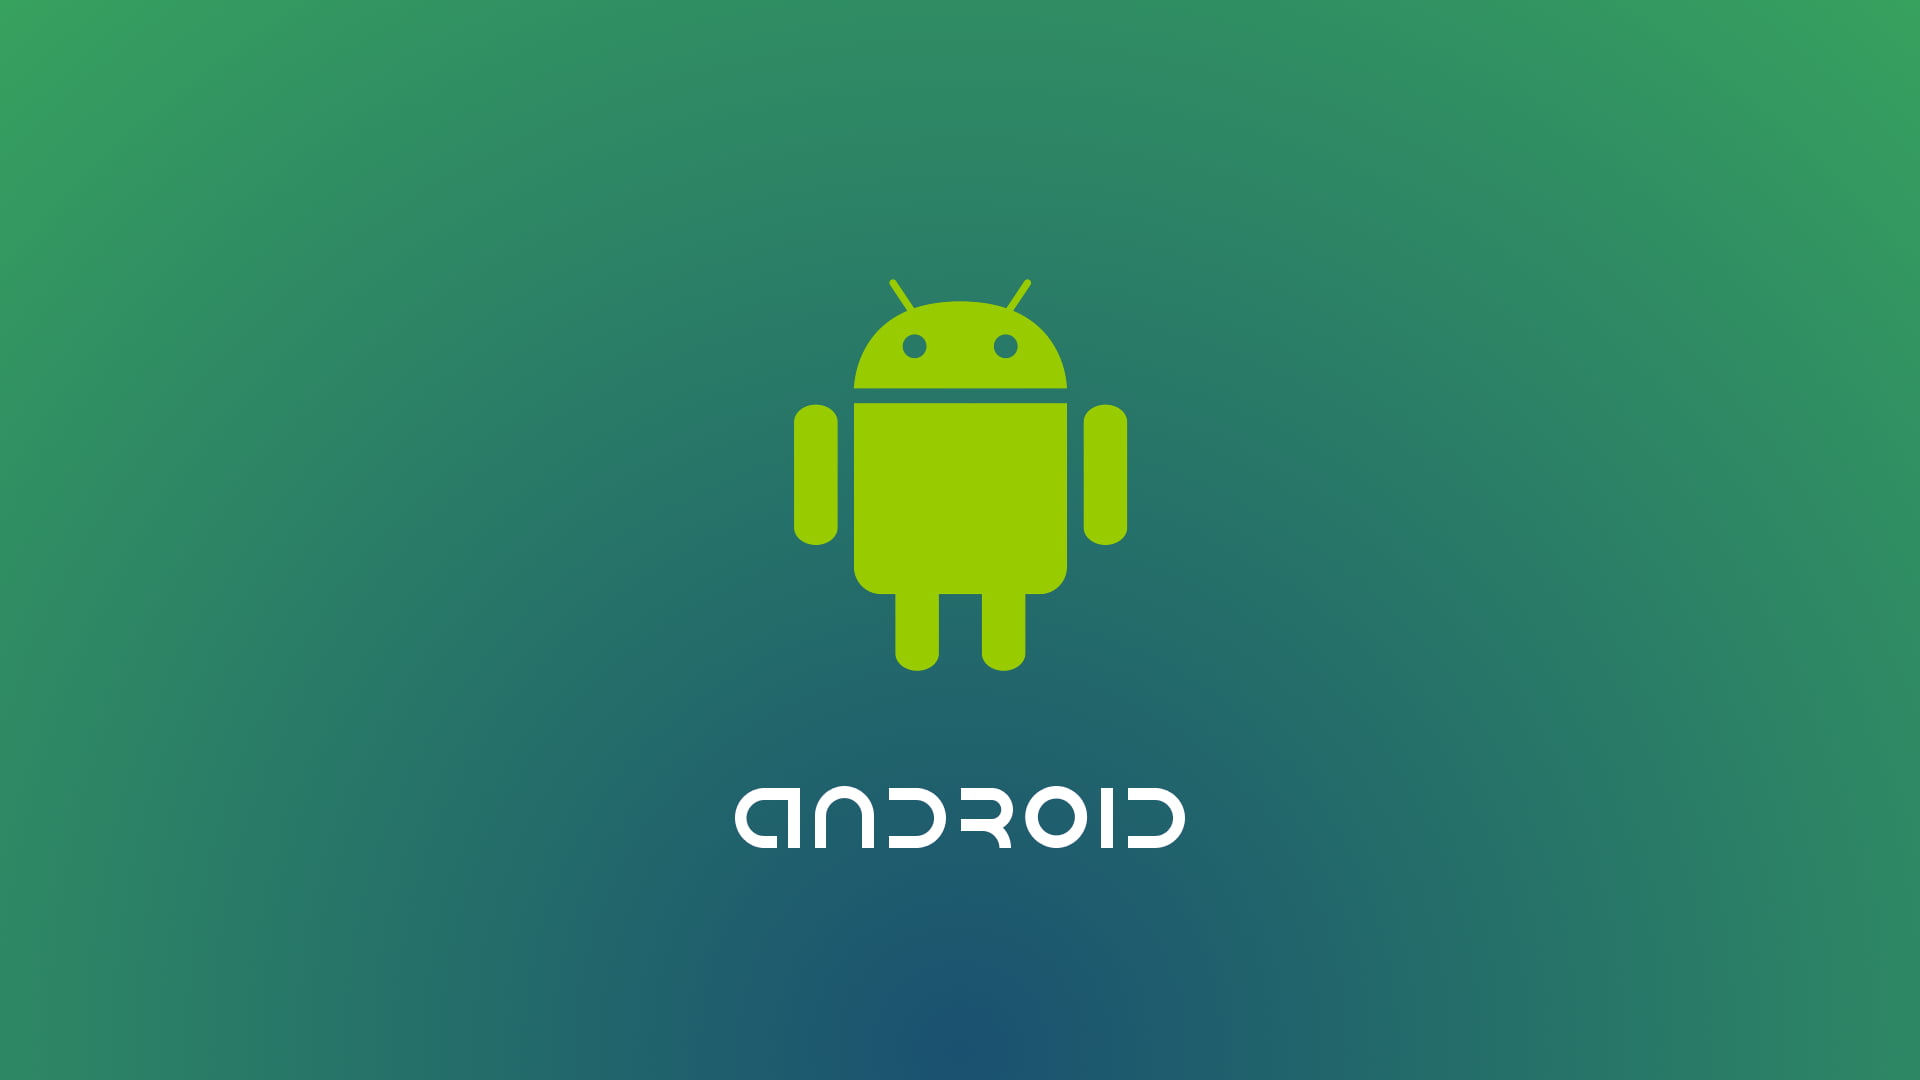 Android logo, Android (operating system), blurred